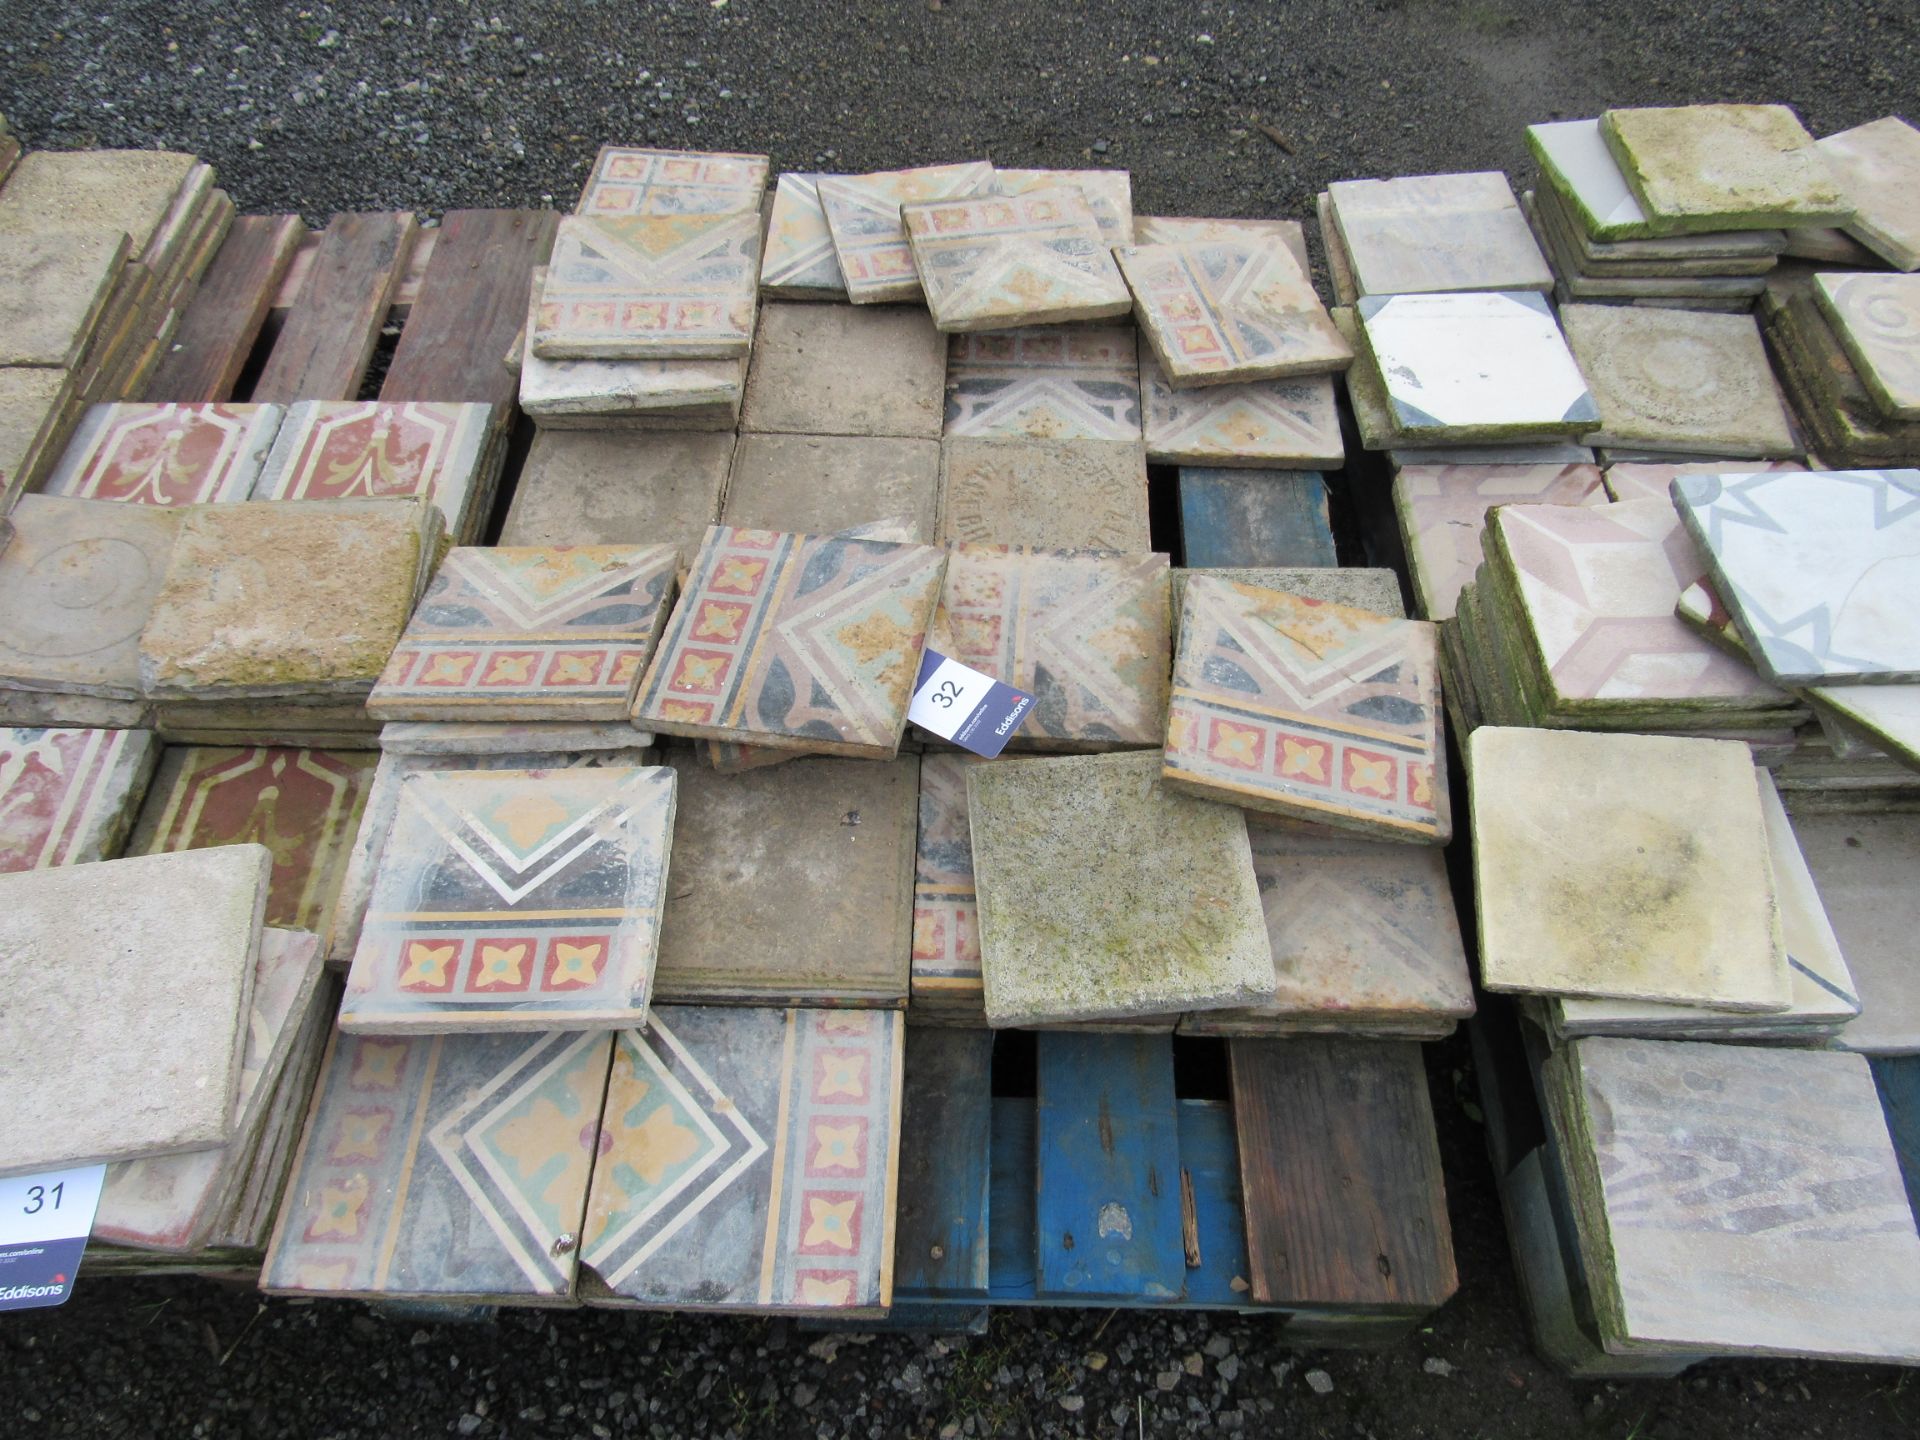 Quantity Reclaimed Tiles to Pallet - Image 2 of 2